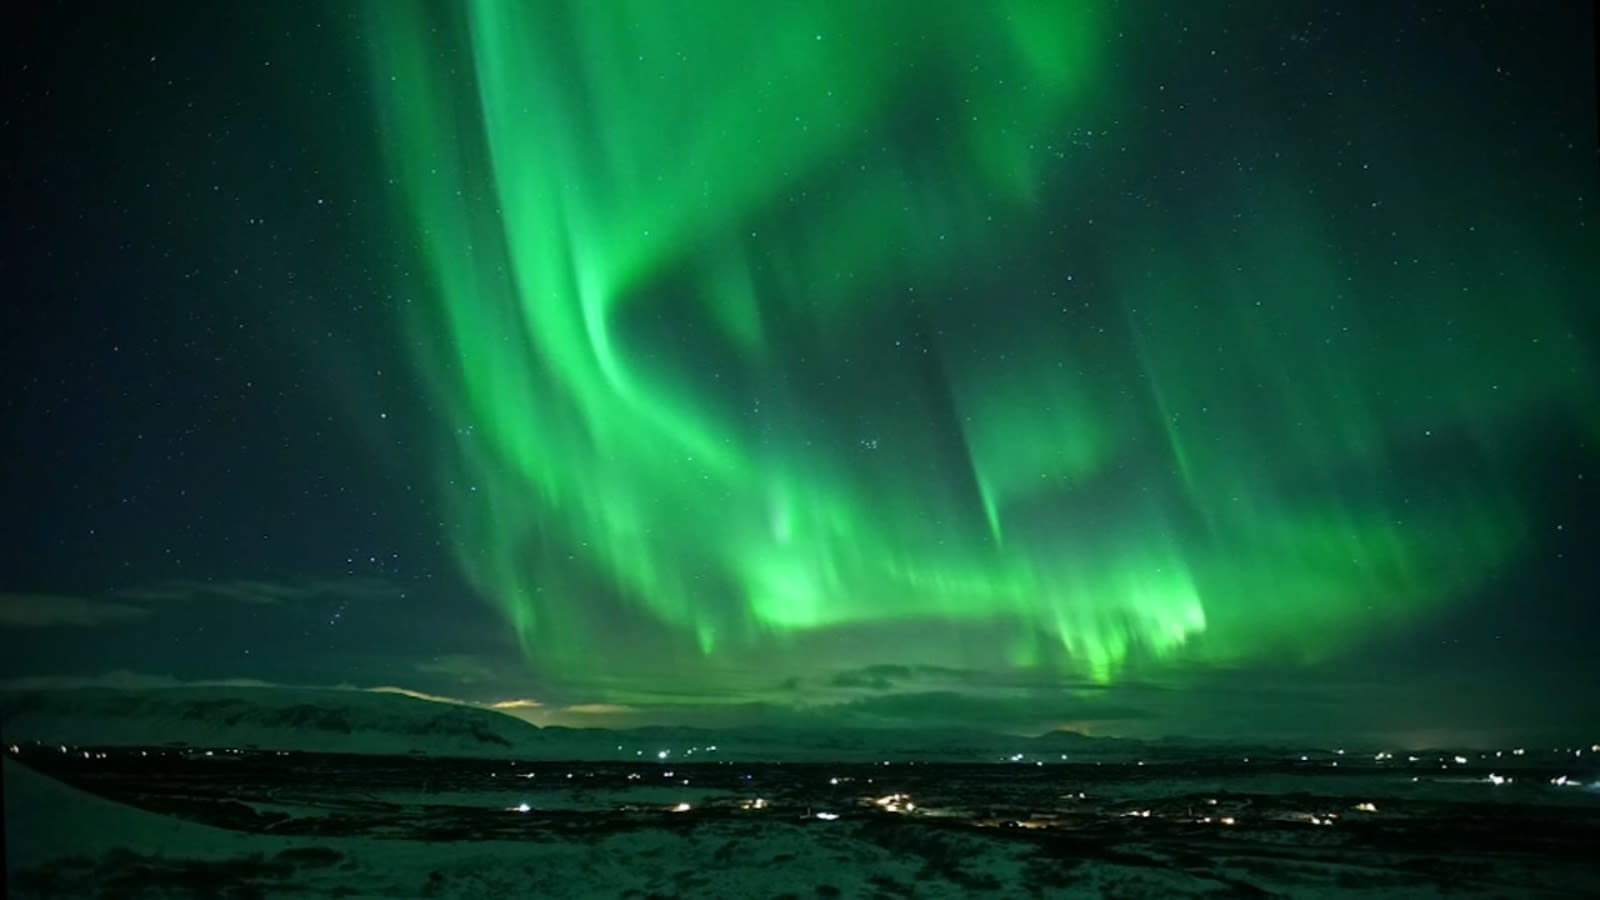 Northern Lights may be visible in parts of California tonight due to strong solar storm